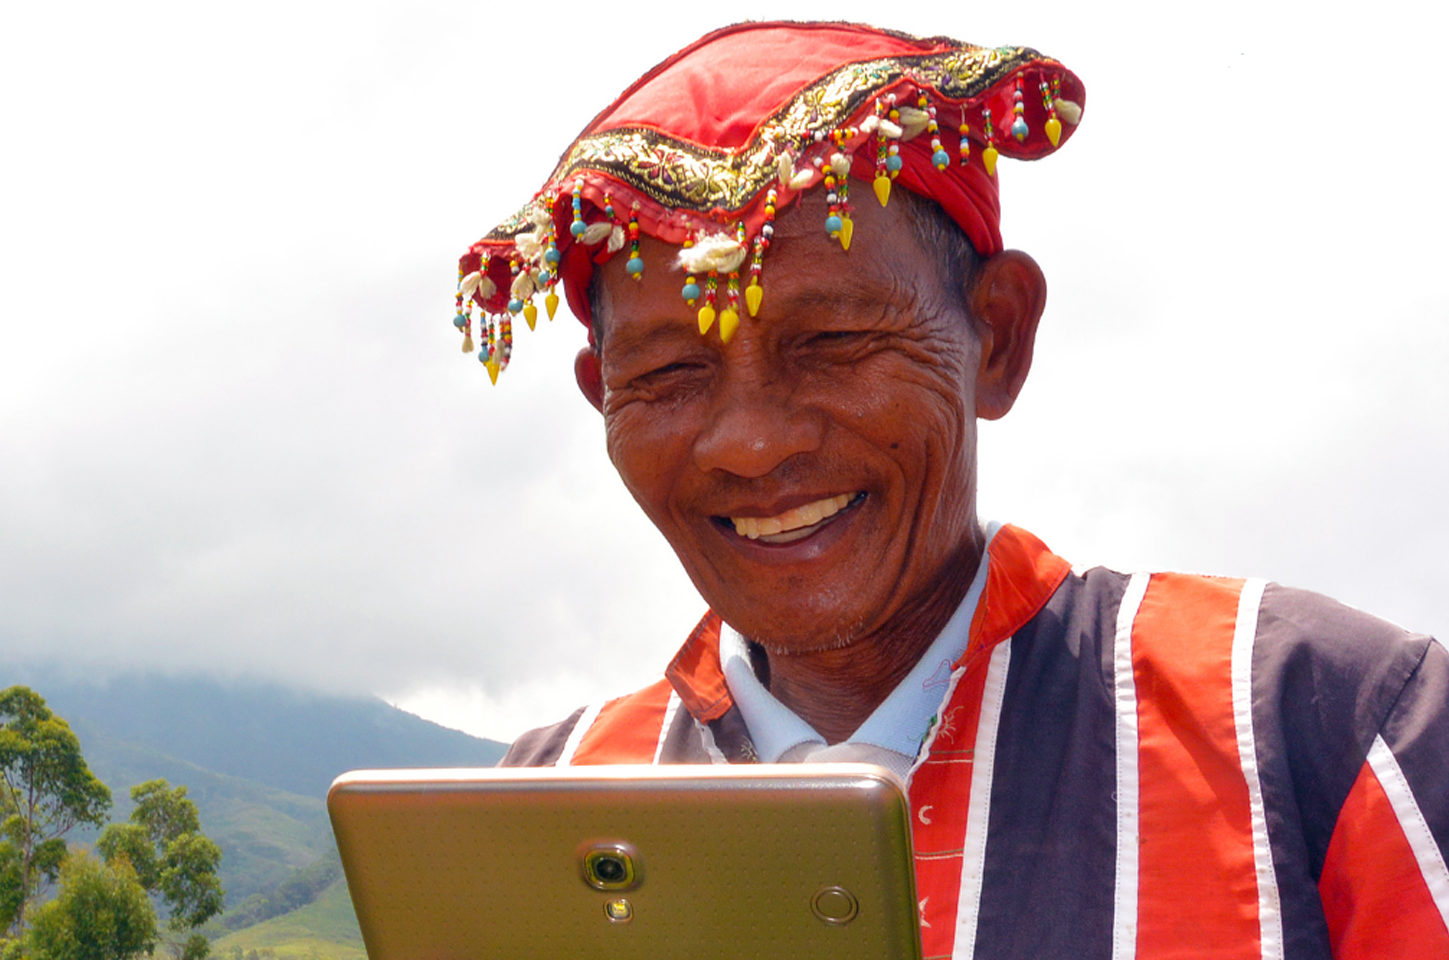 Image of a man smiling while operating a tablet.